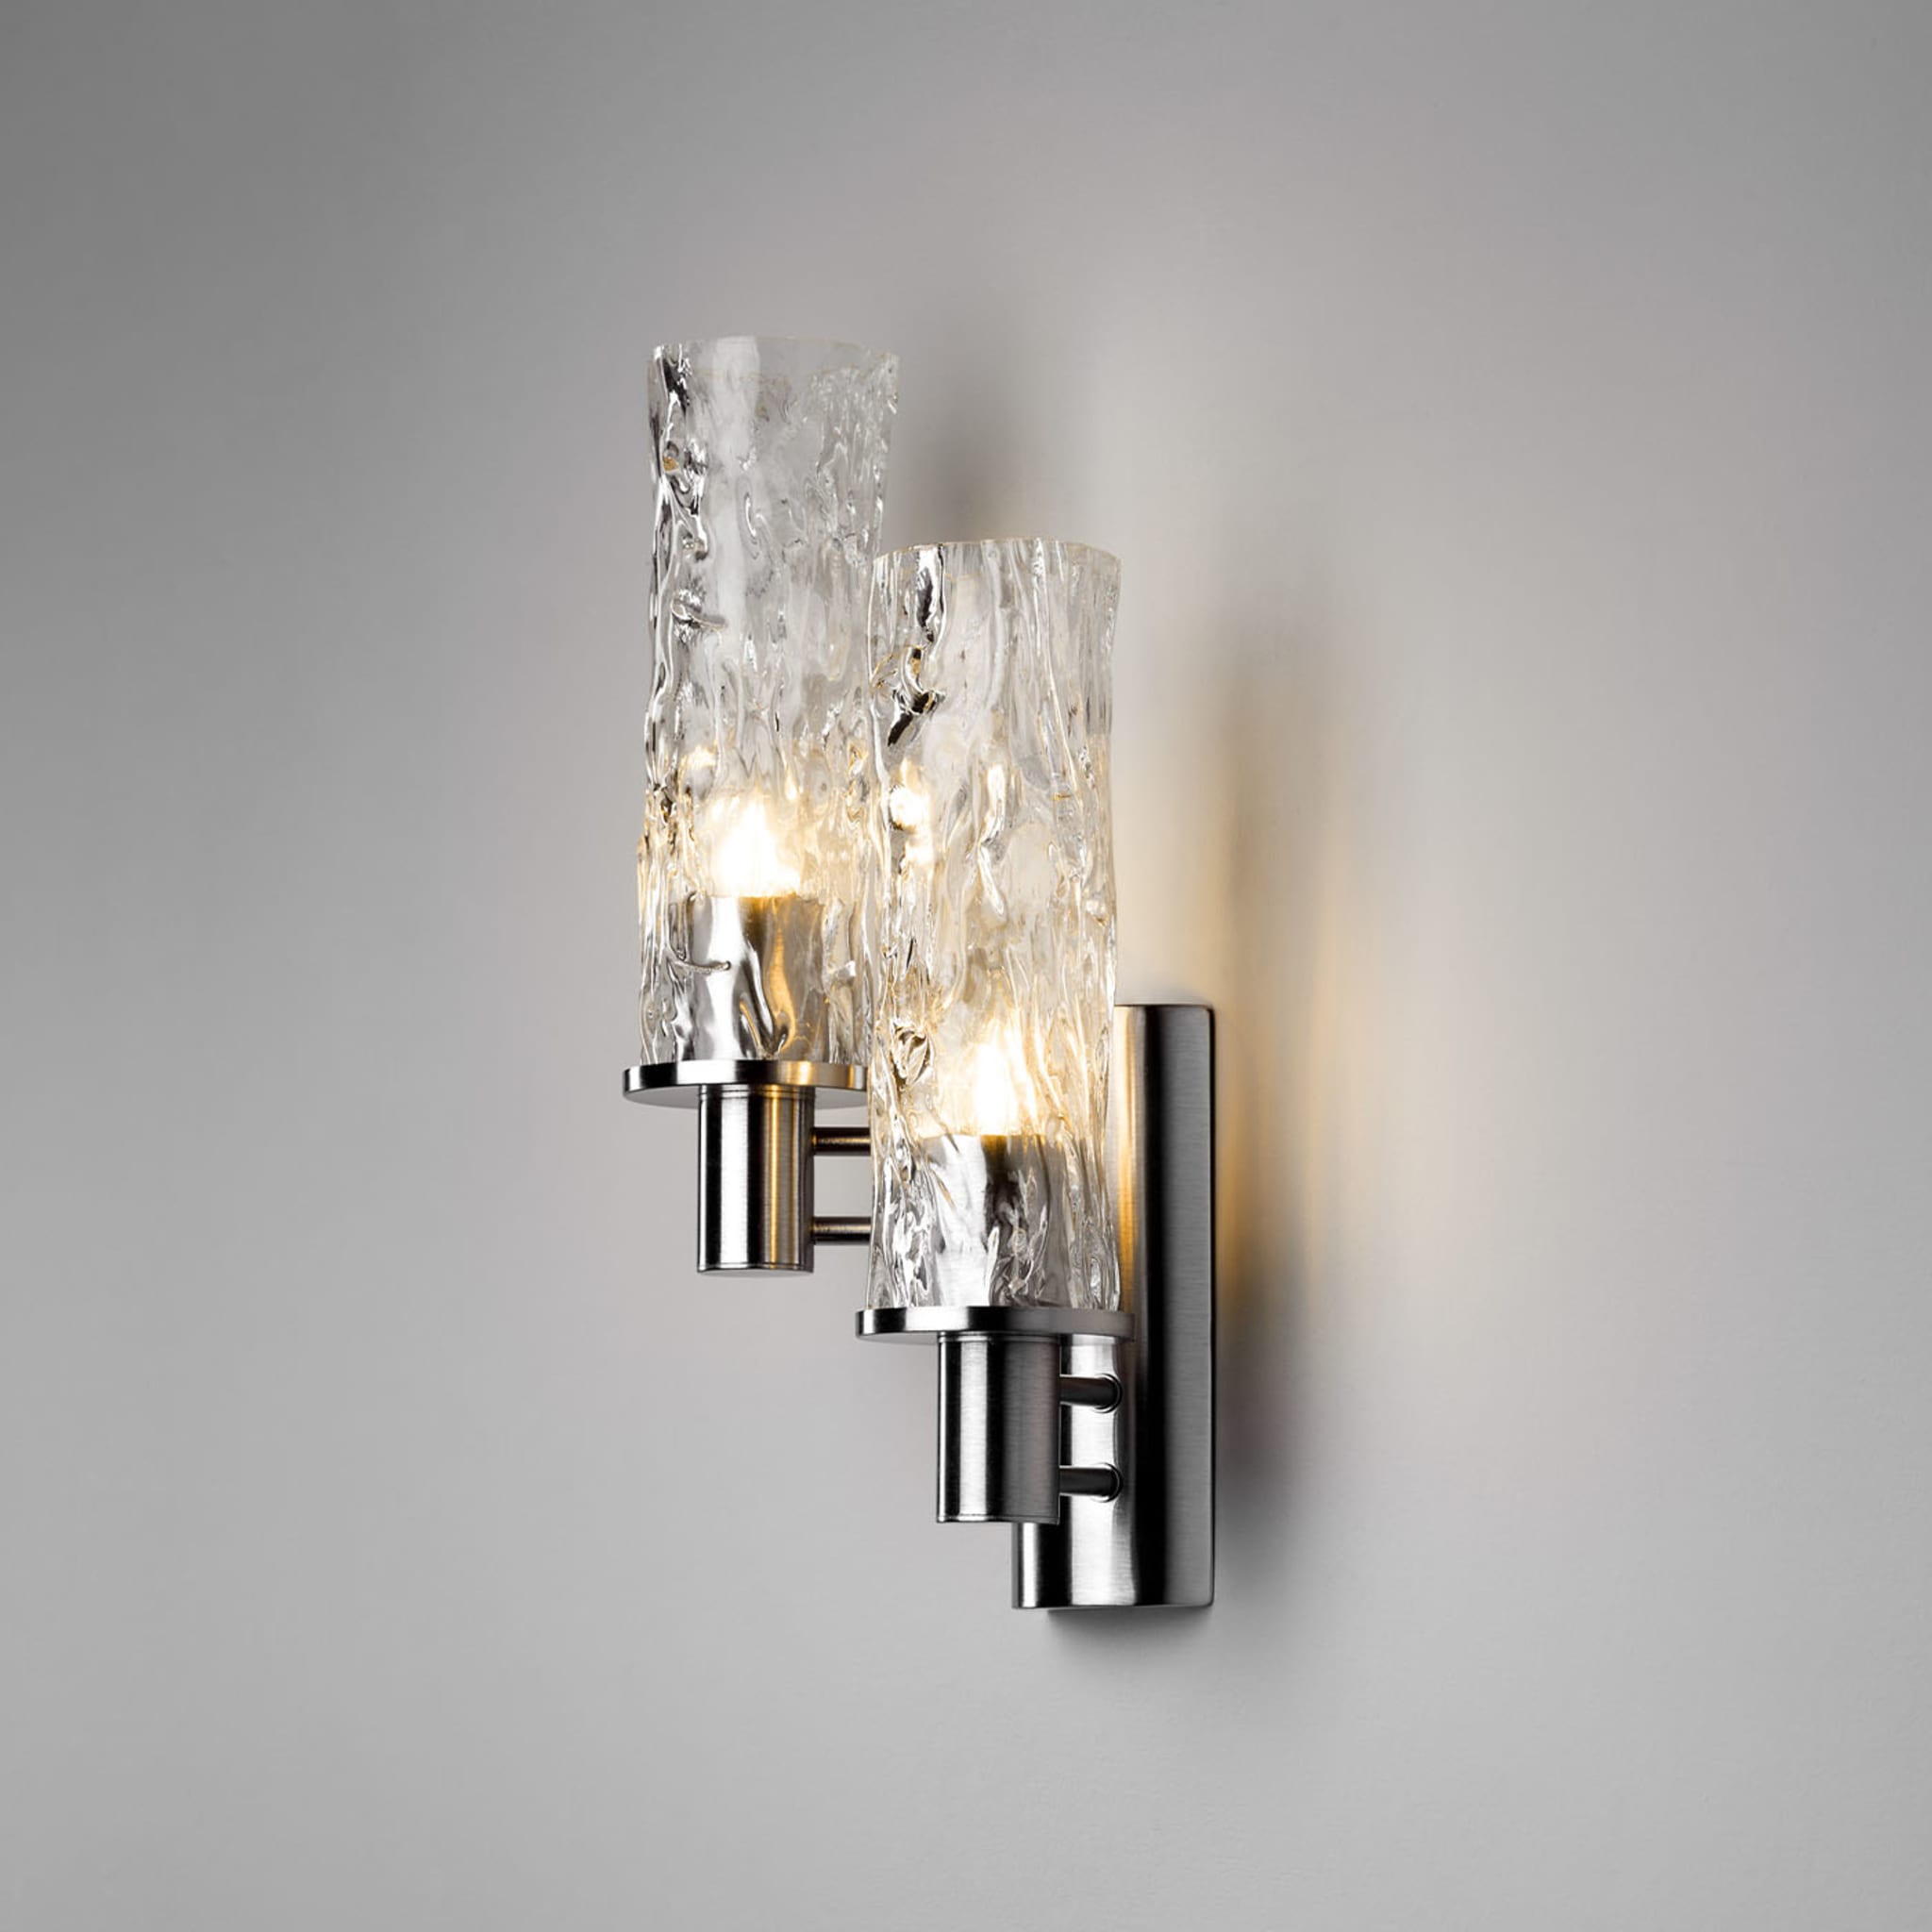 Wall Sconce With Two Blown Glass Elements - Alternative view 2